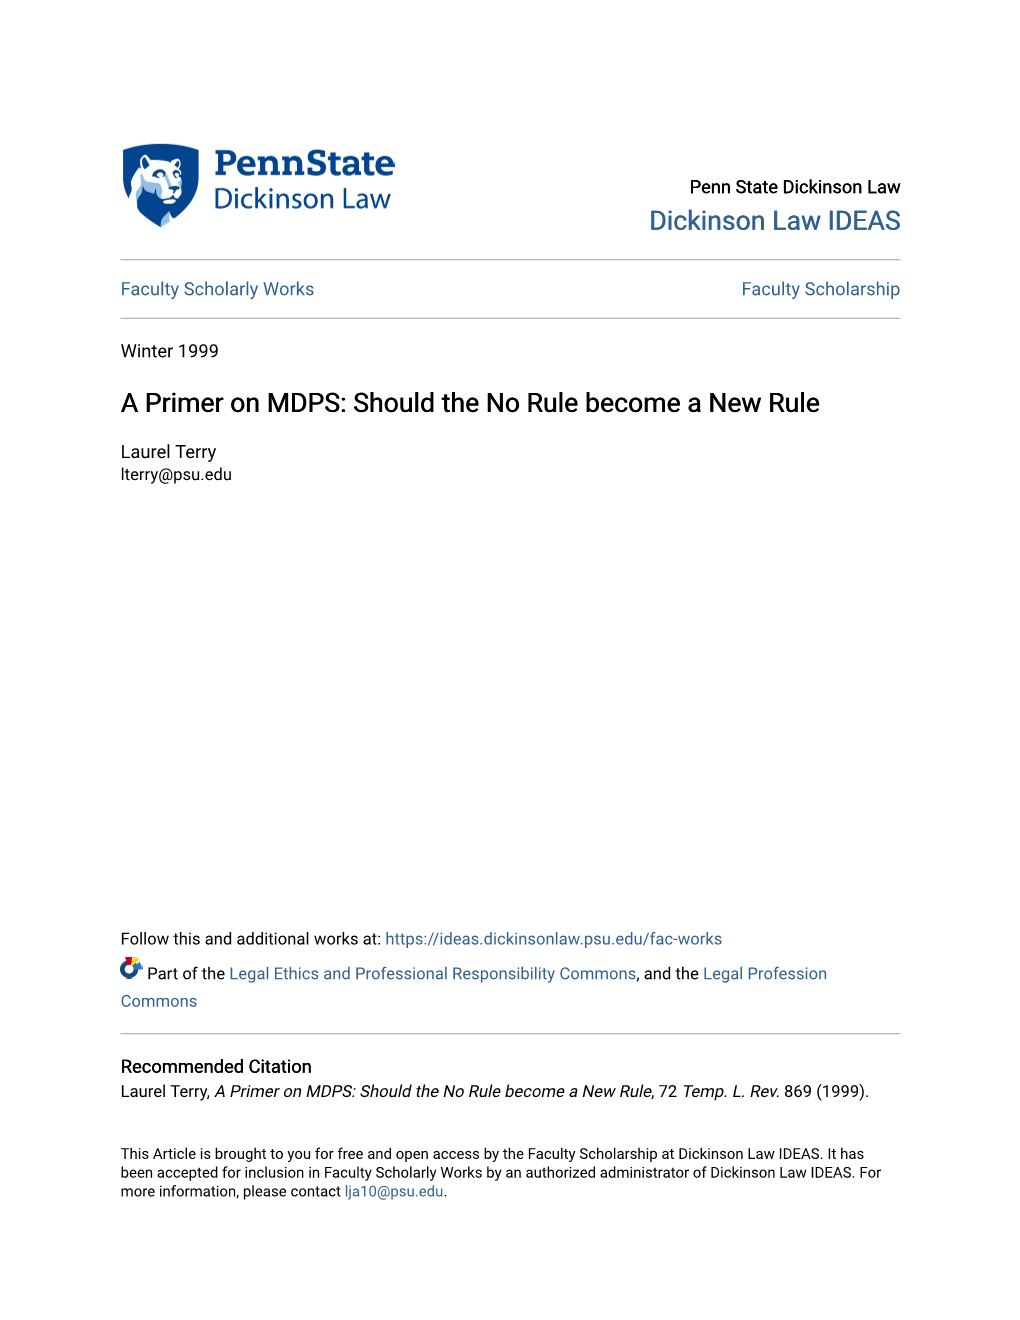 A Primer on MDPS: Should the No Rule Become a New Rule